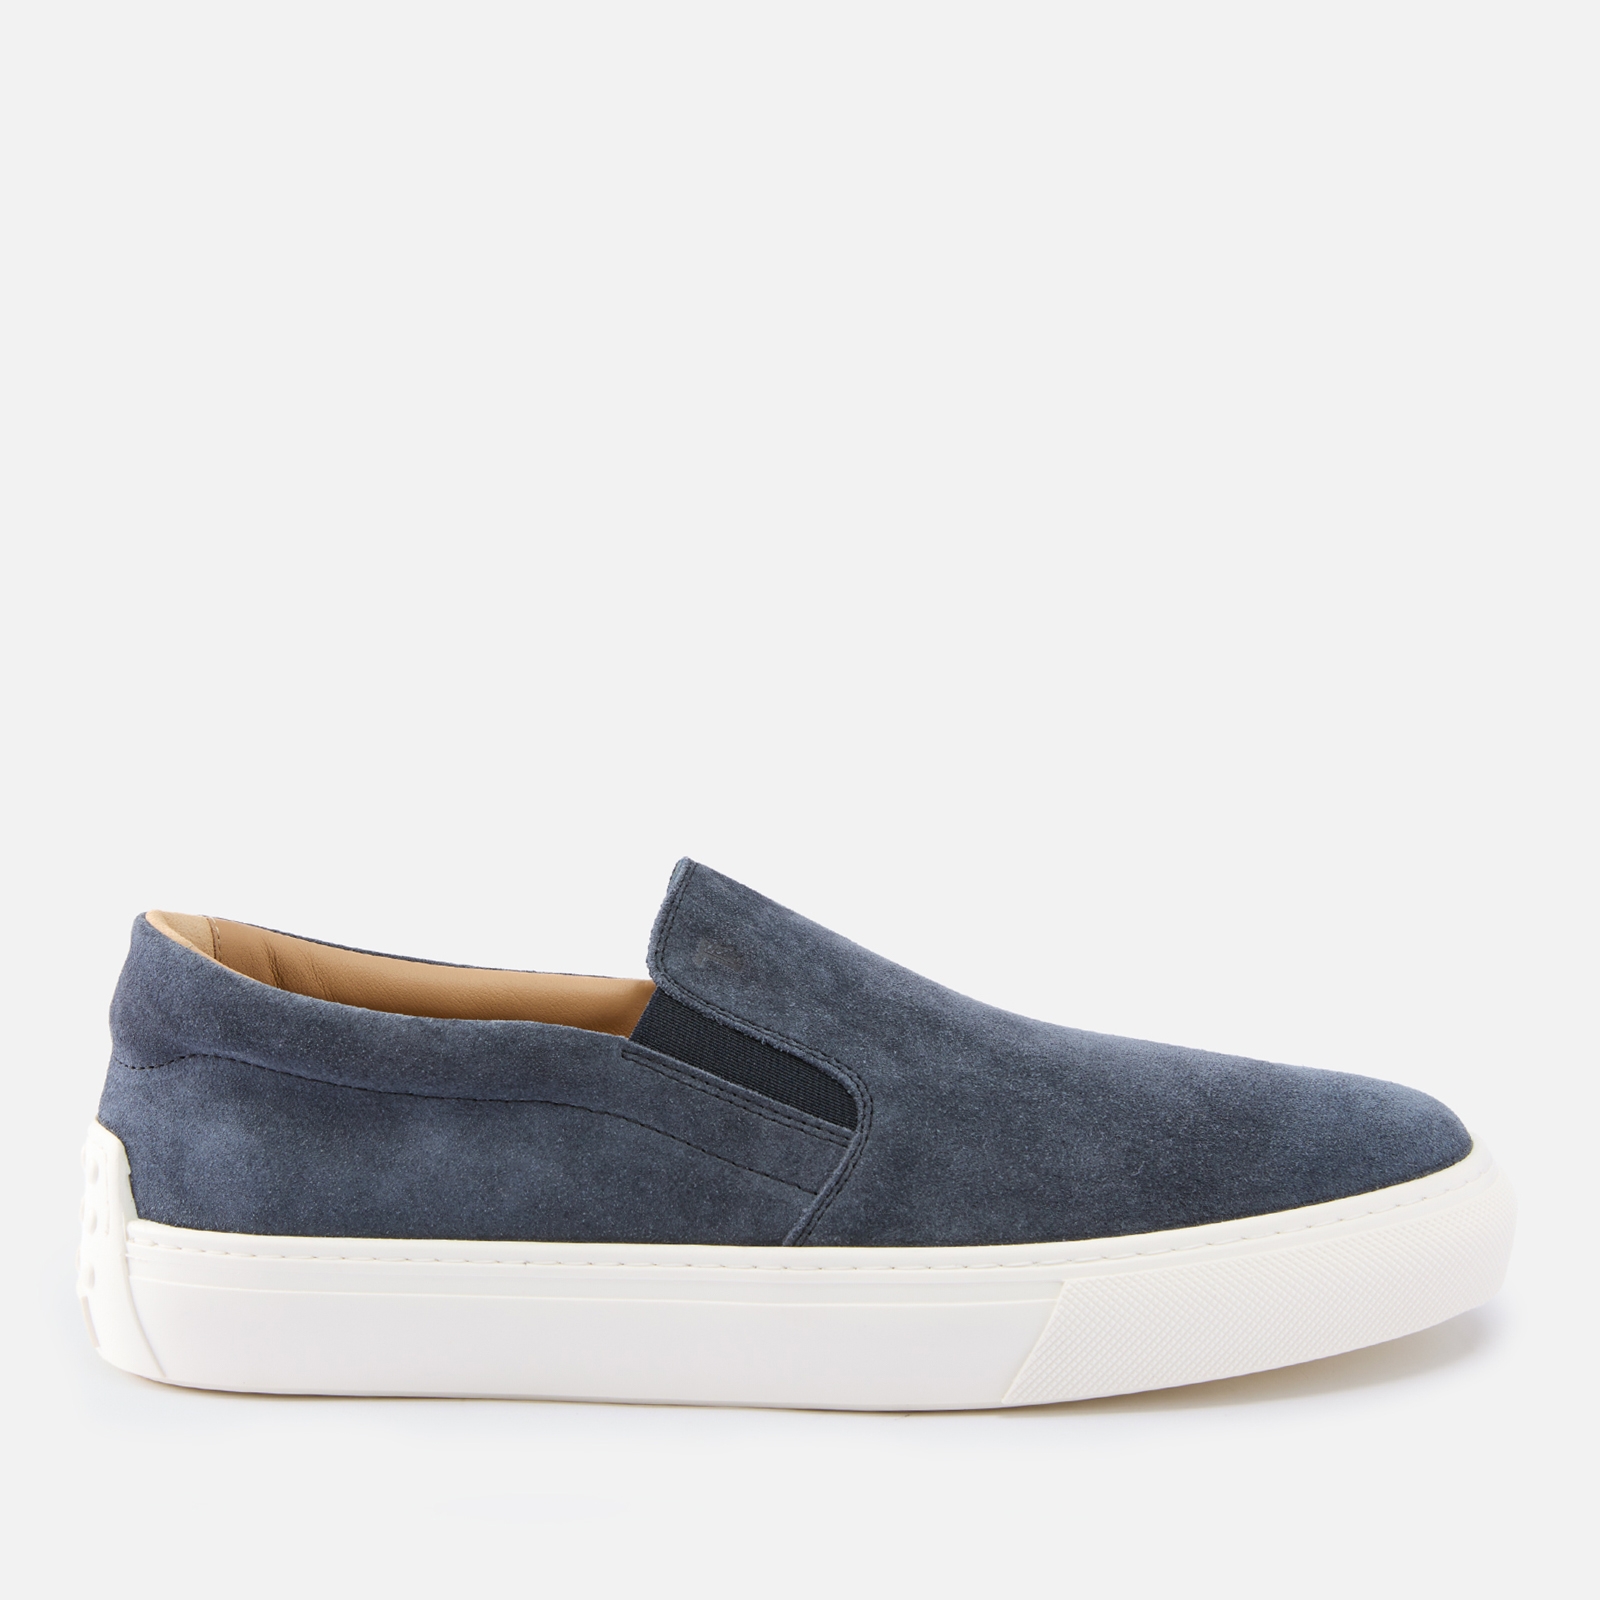 Tod's Men's Suede Slip-On Trainers - UK 7